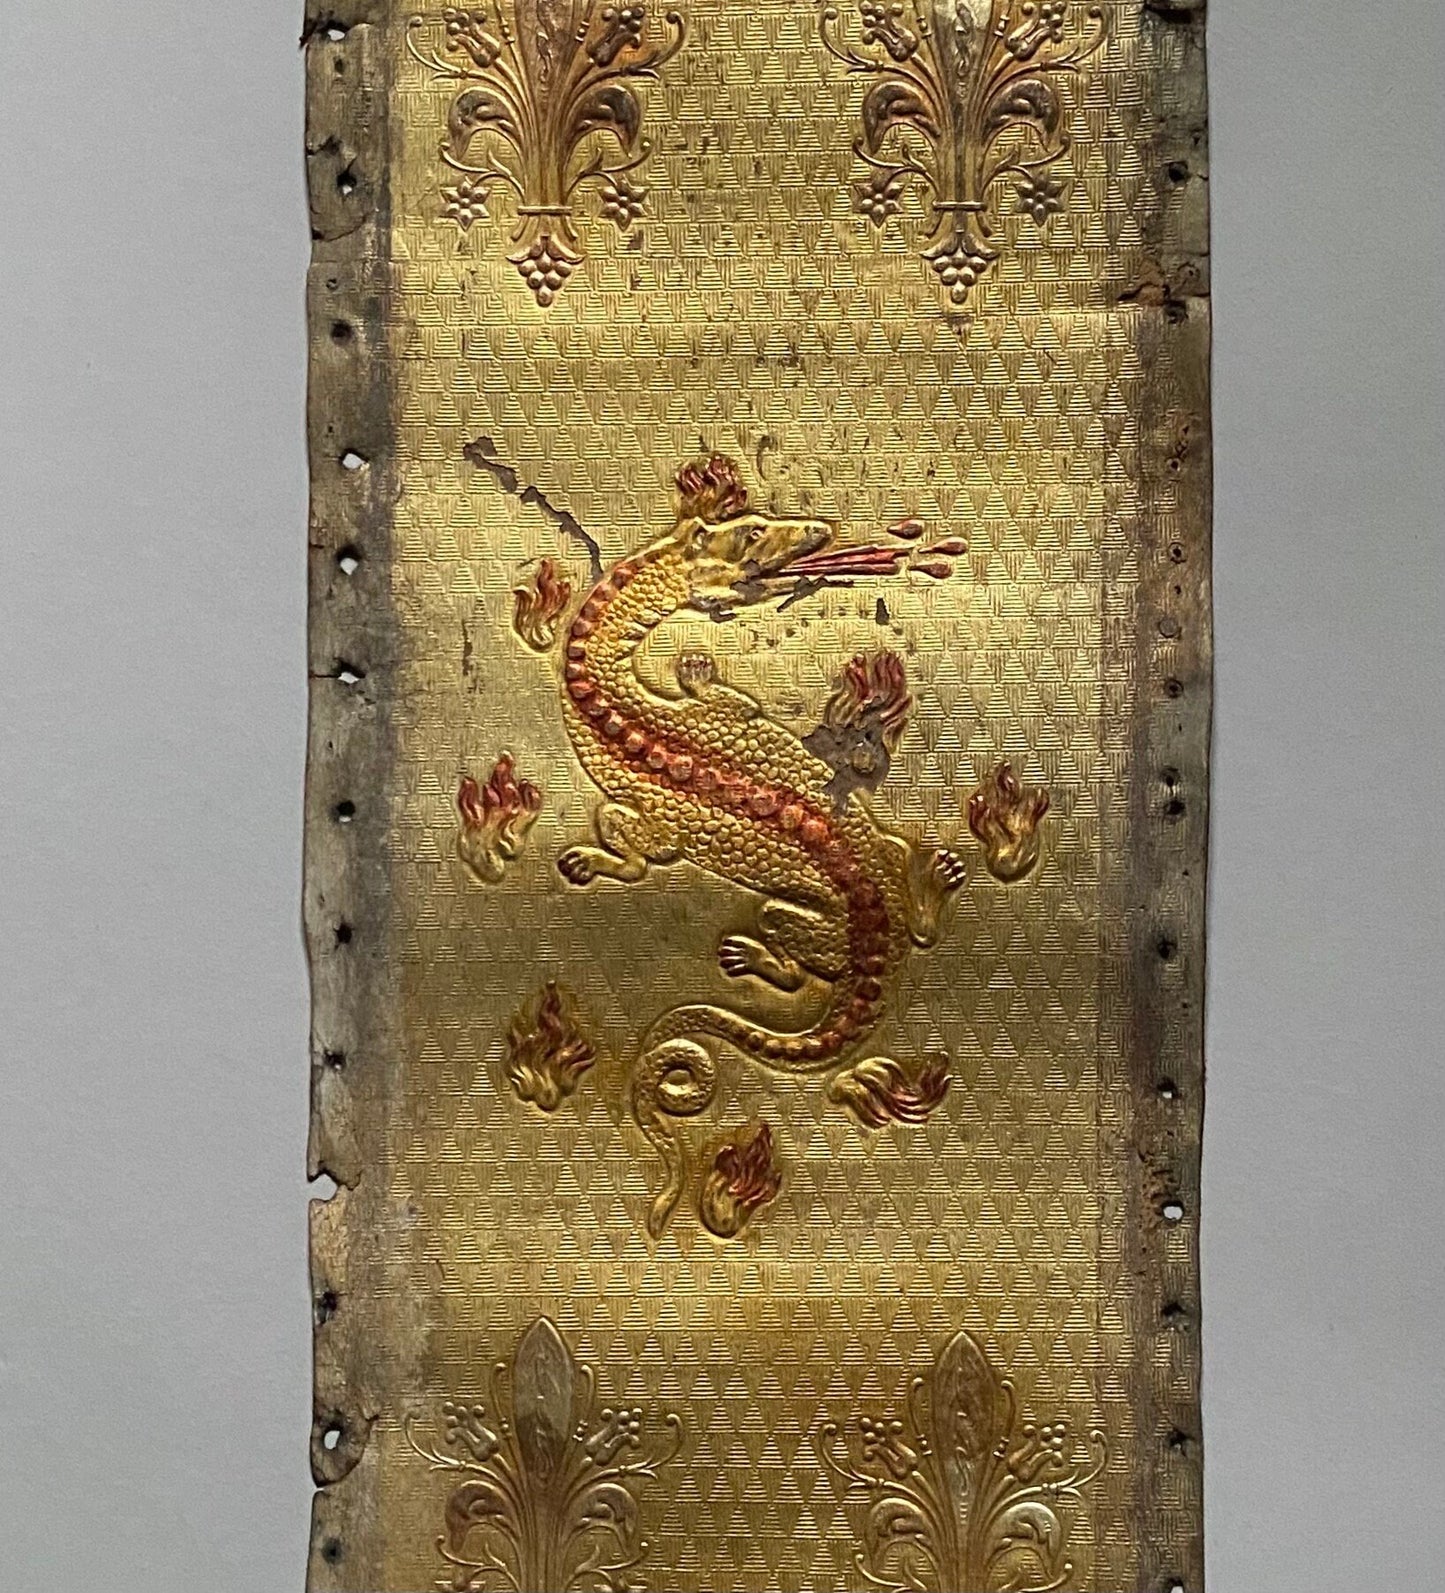 Two Long Lengths of Gilded Antique Leather Decorated With Bronze Dragons and Siver Fleur de Lis. French. Size: 9.5 meters in length.